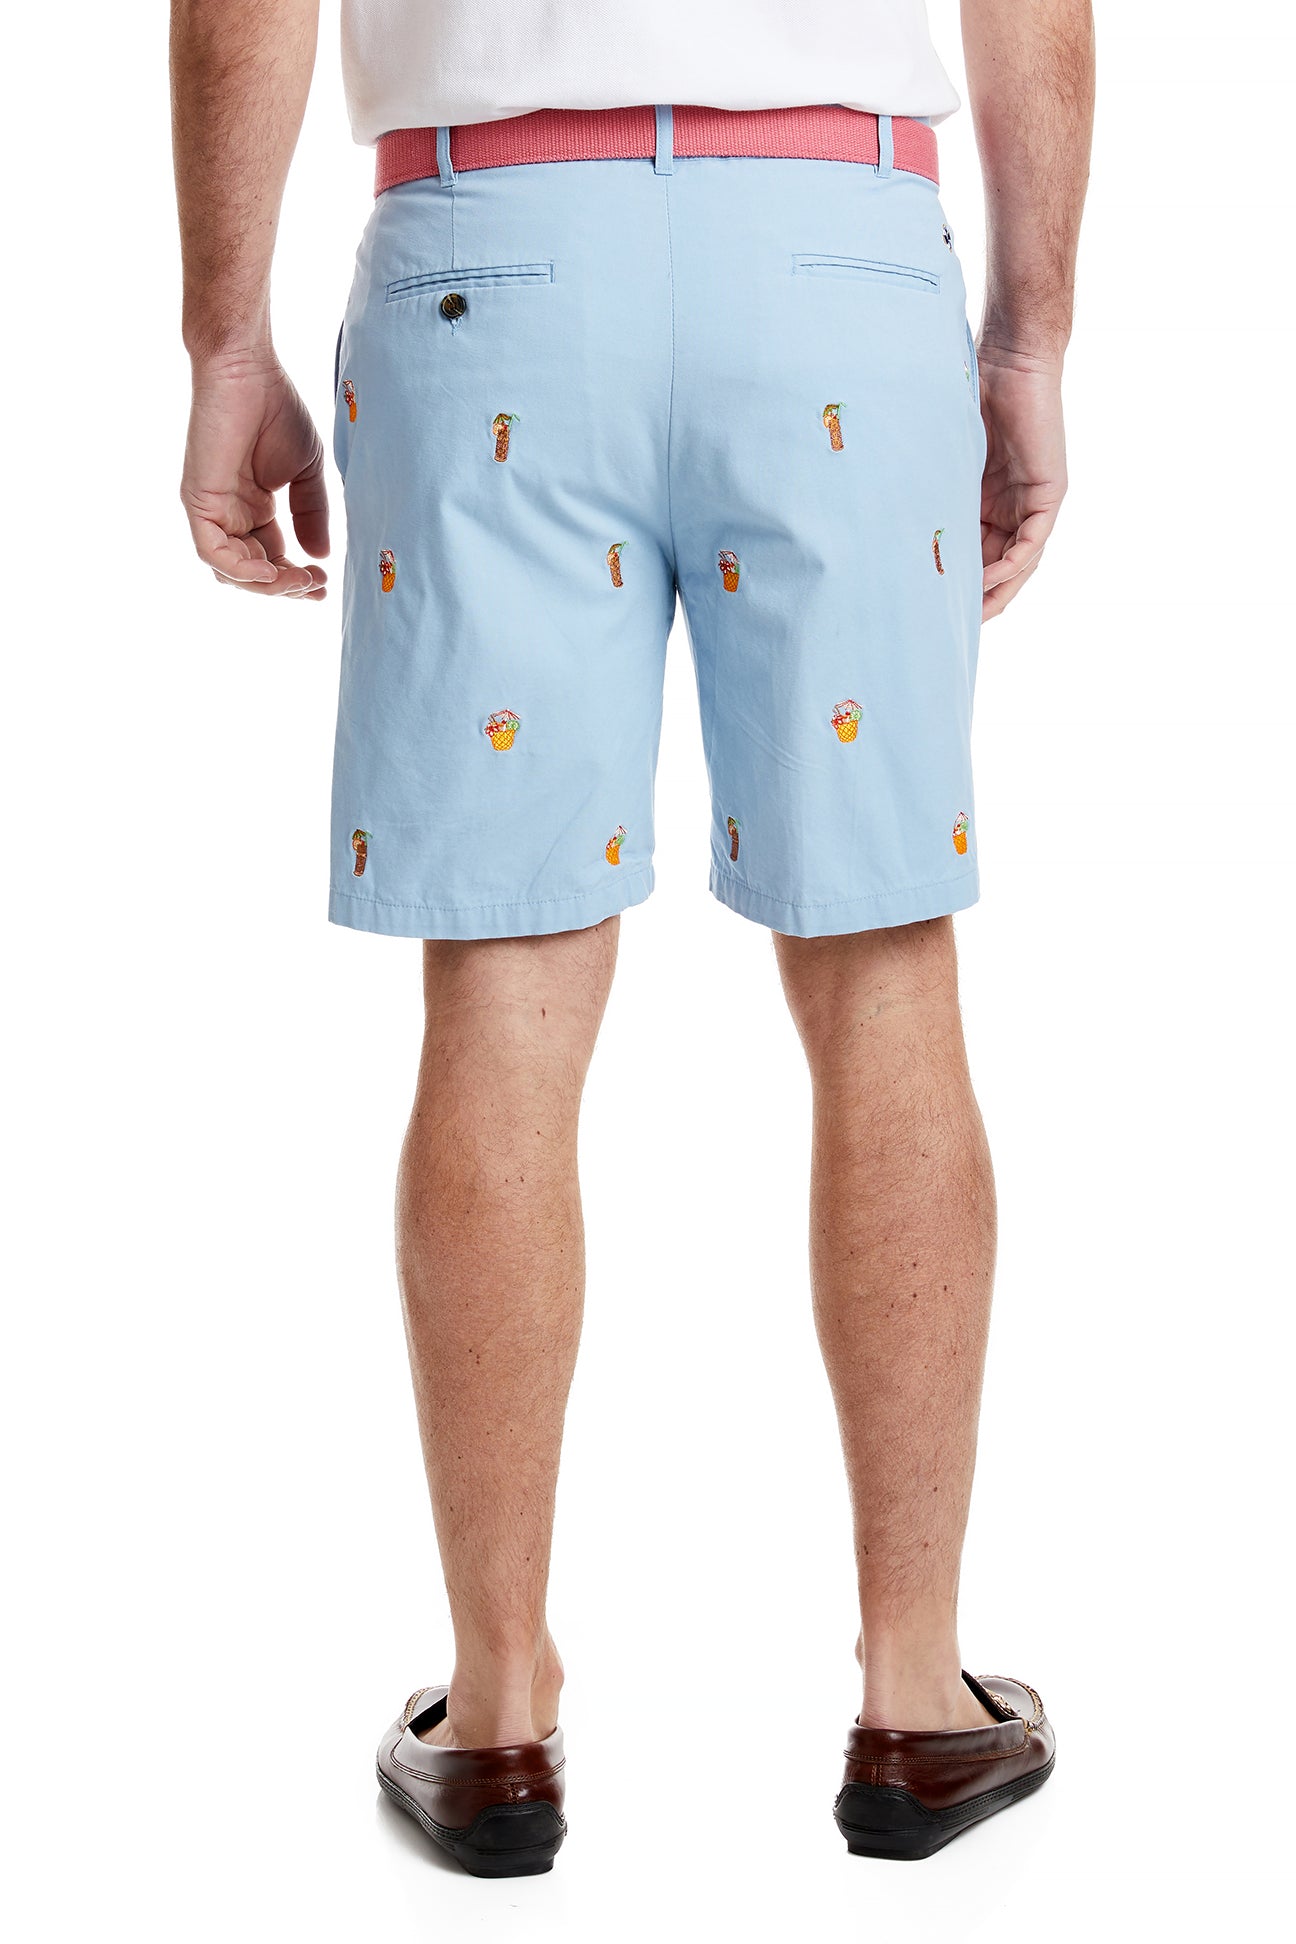 Island Short Canvas Blue Grotto with Tiki and Coconut Drinks MENS EMBROIDERED SHORTS Castaway Nantucket Island